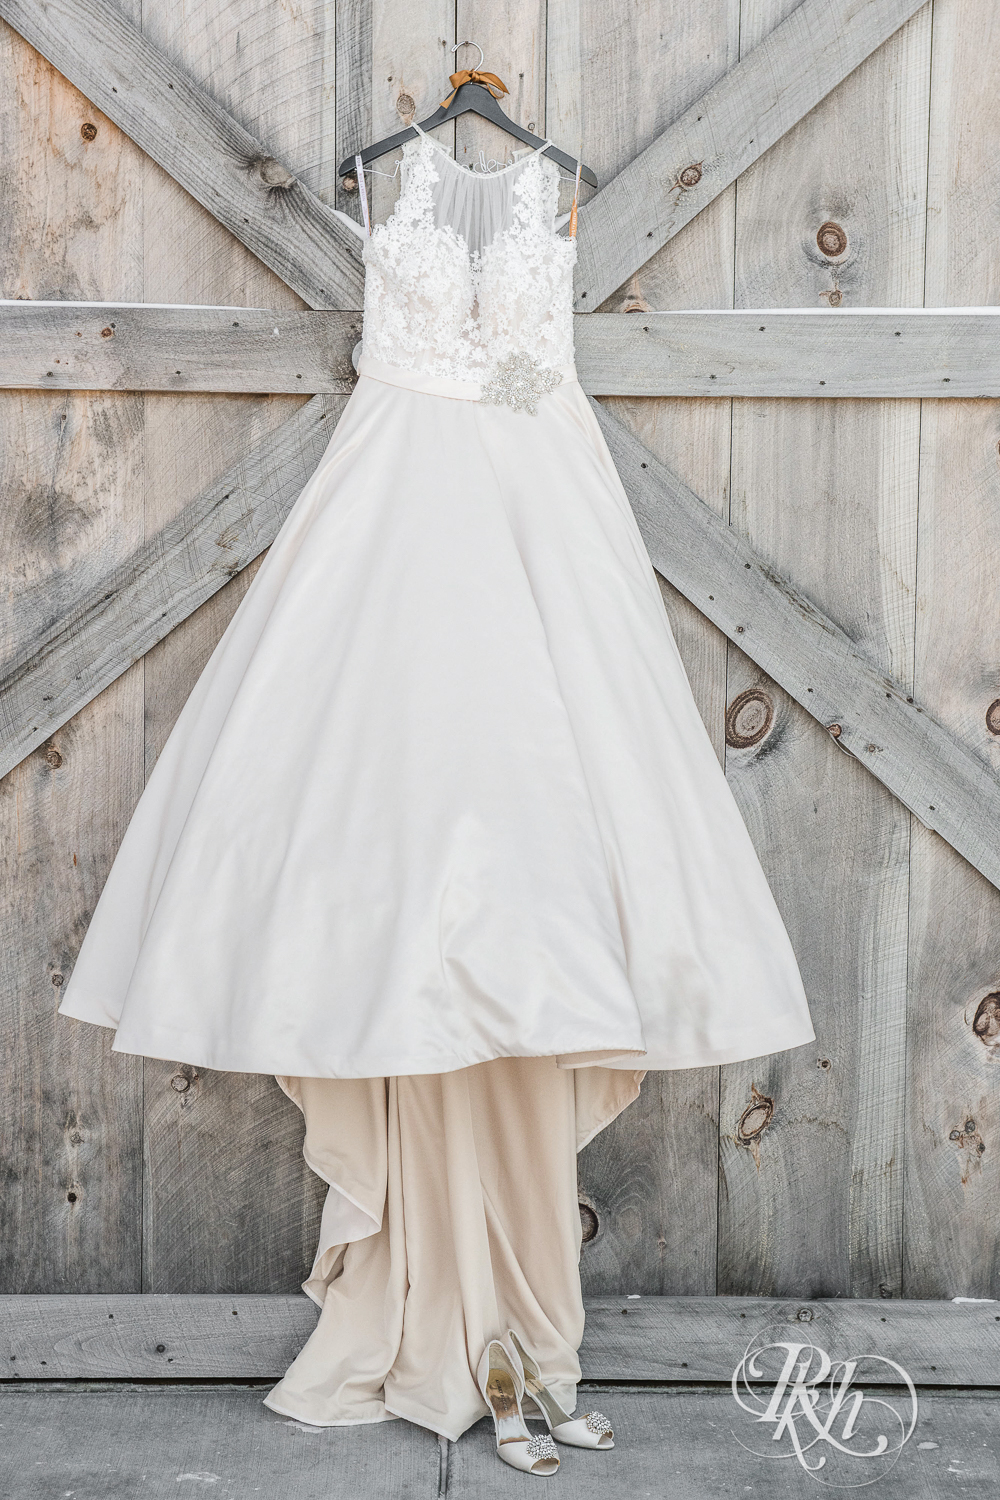 Wedding dress hanging on barn door with shoes at Creekside Farm in Rush City, Minnesota.